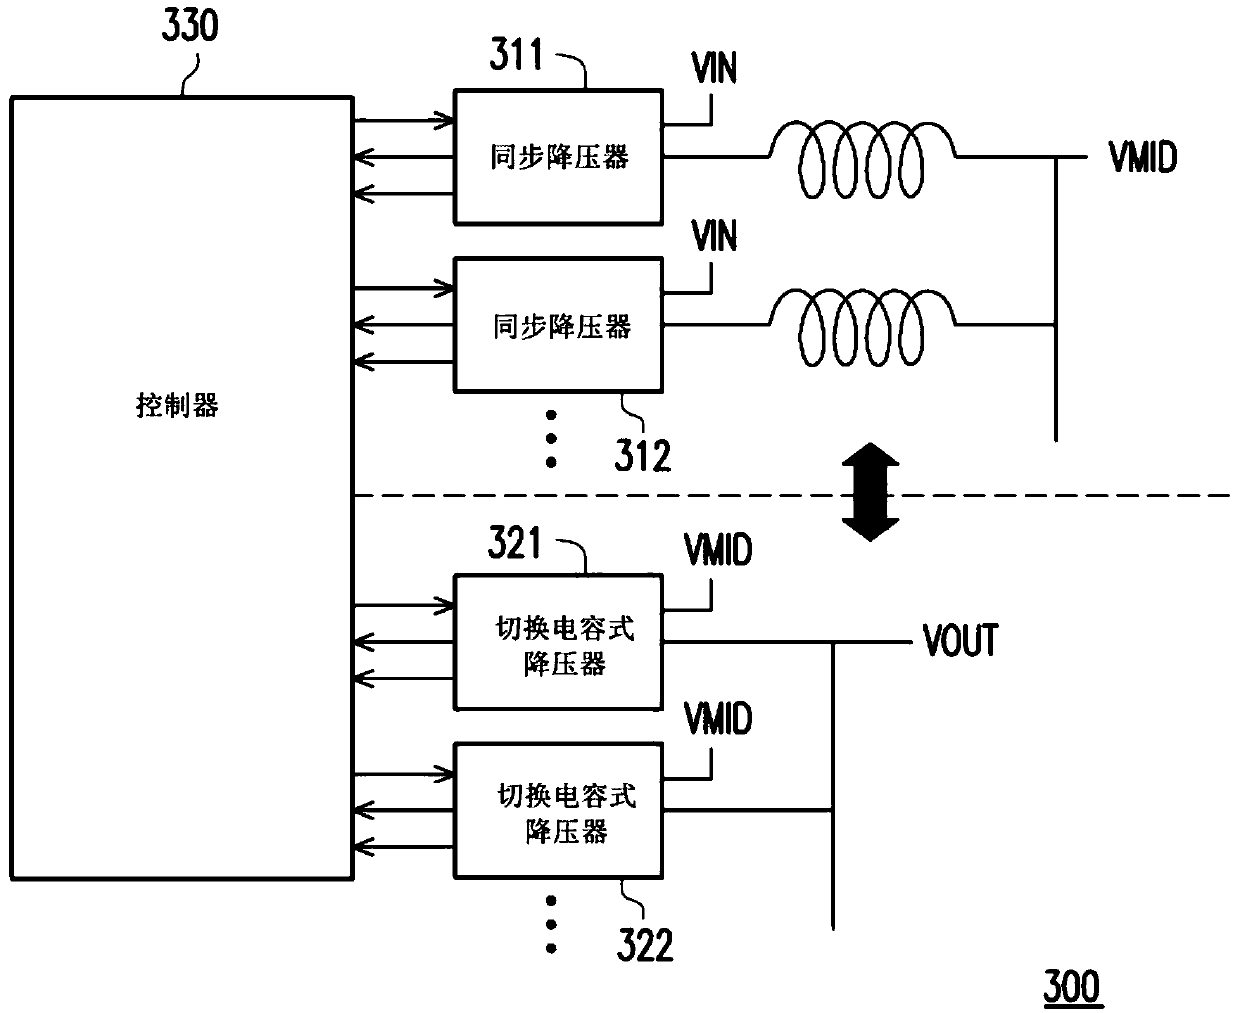 Multi-phase power supply for stepdown system